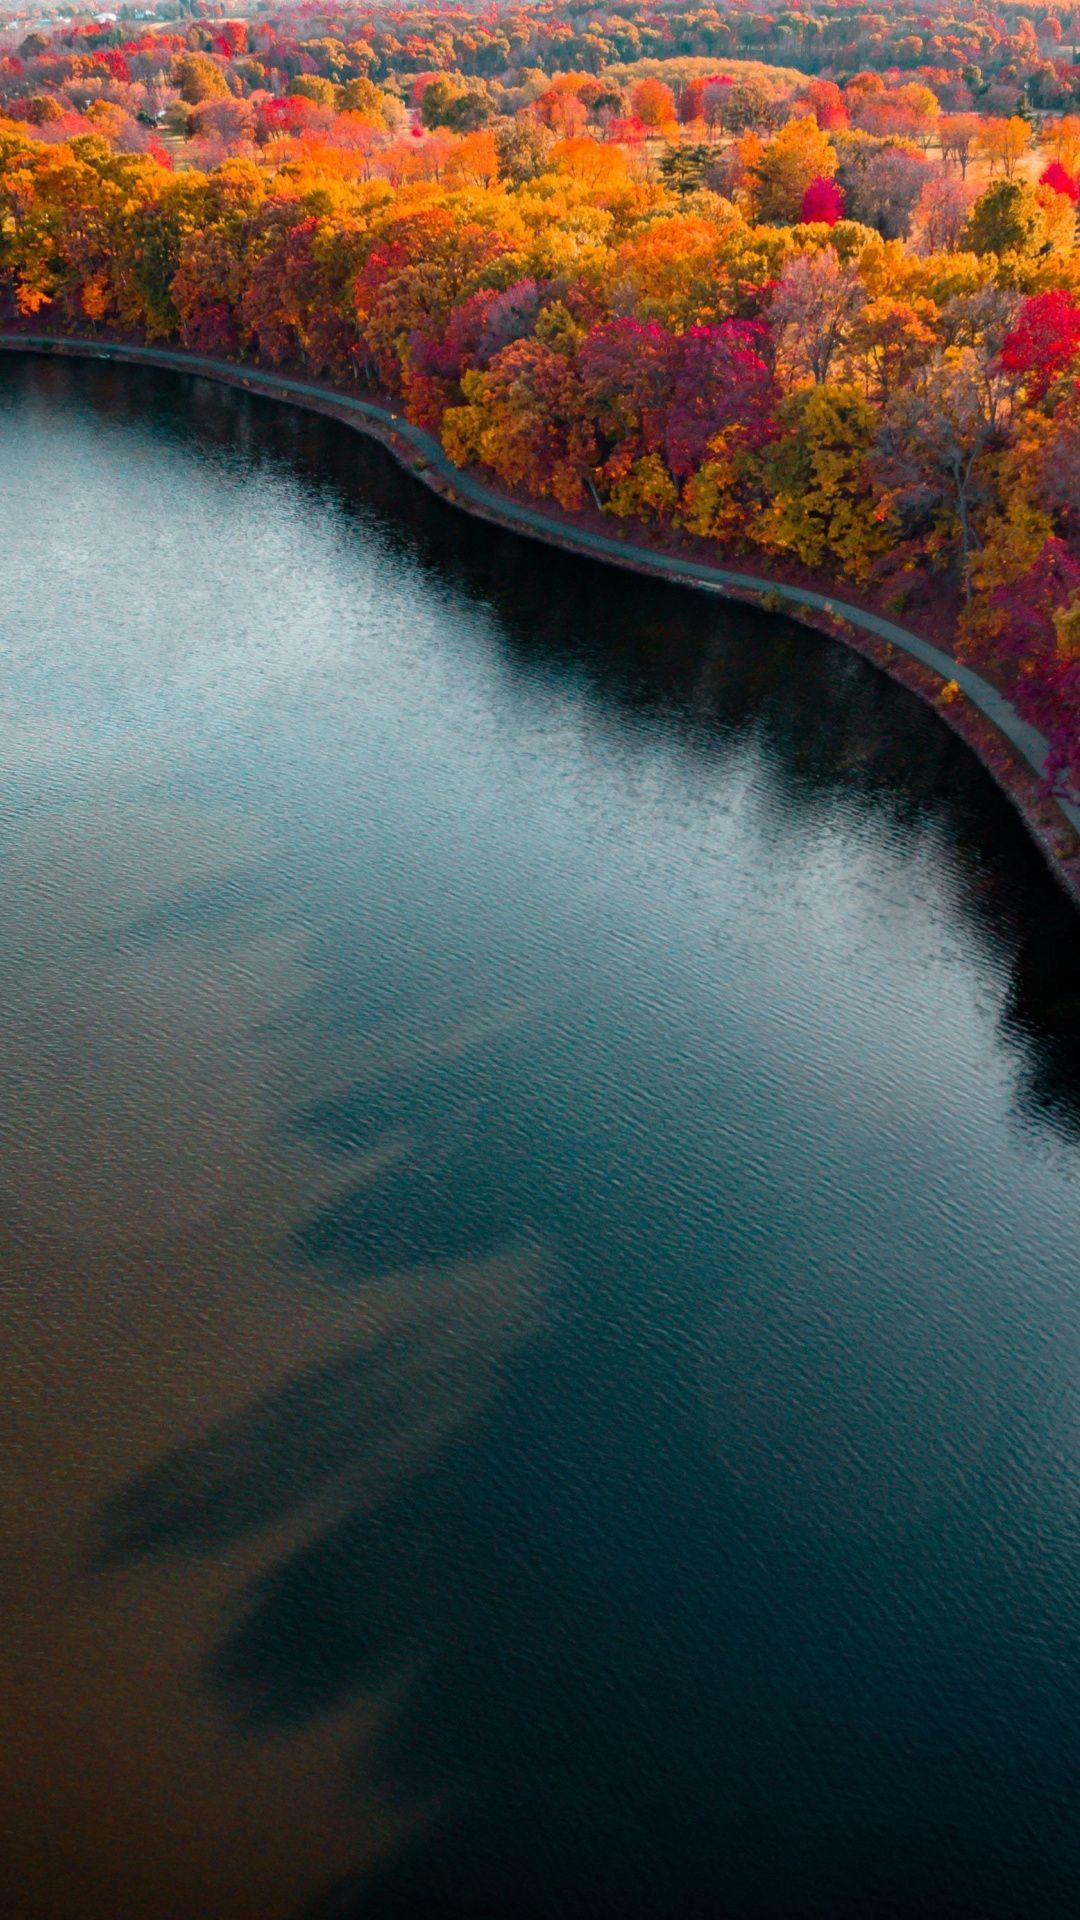 IPhone wallpaper of a river surrounded by trees with fall foliage - Lake